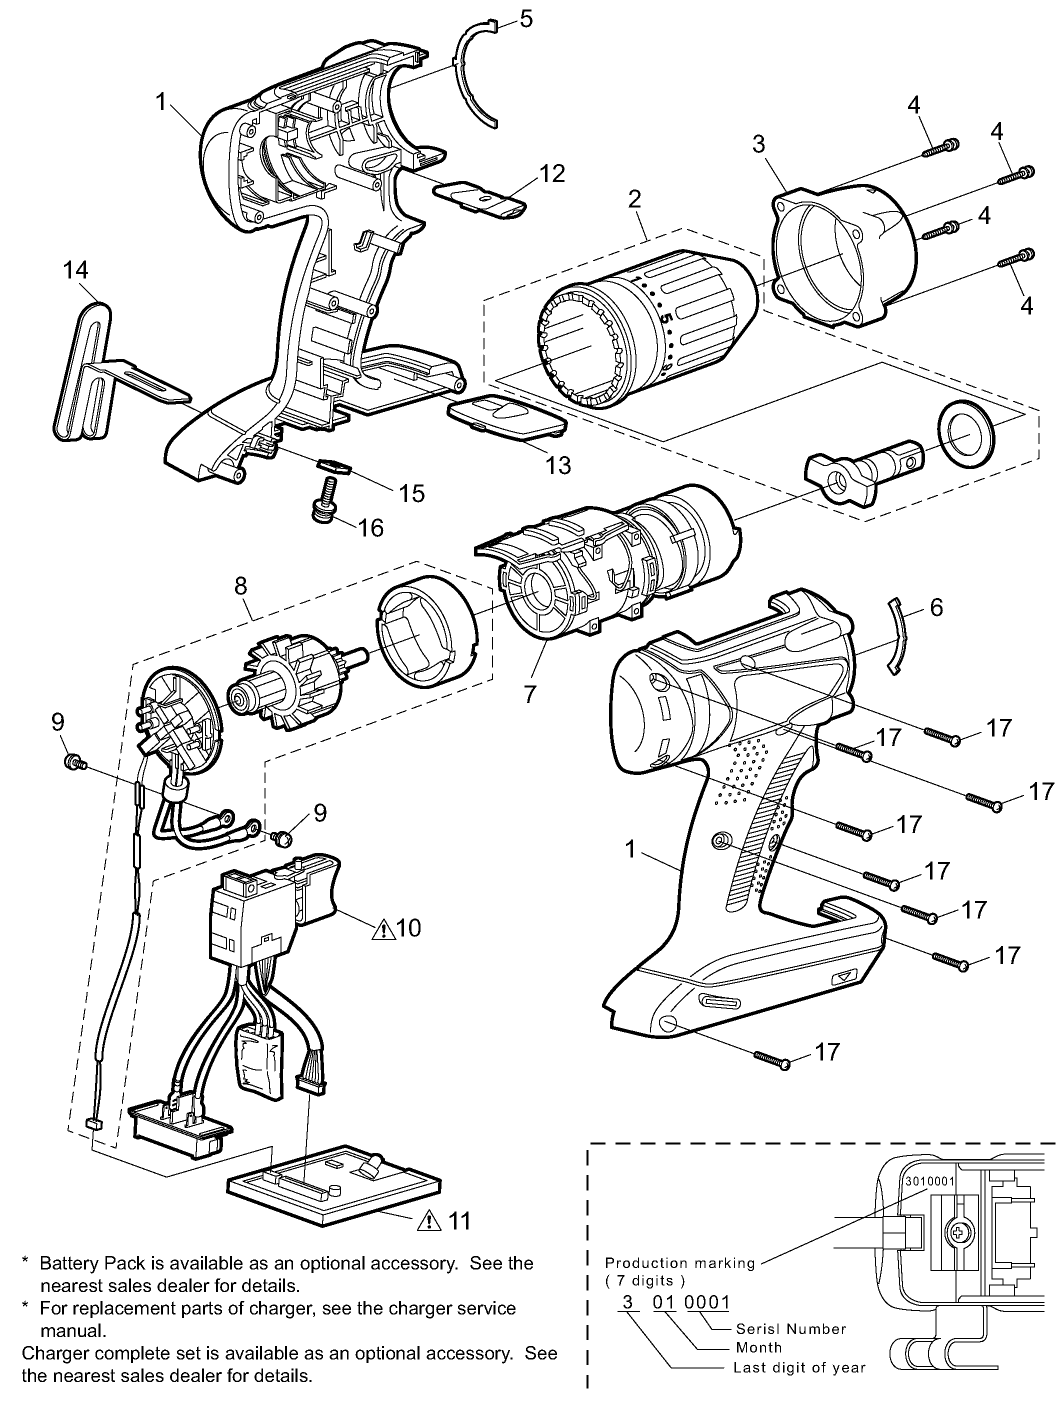 EY7549: Exploded View